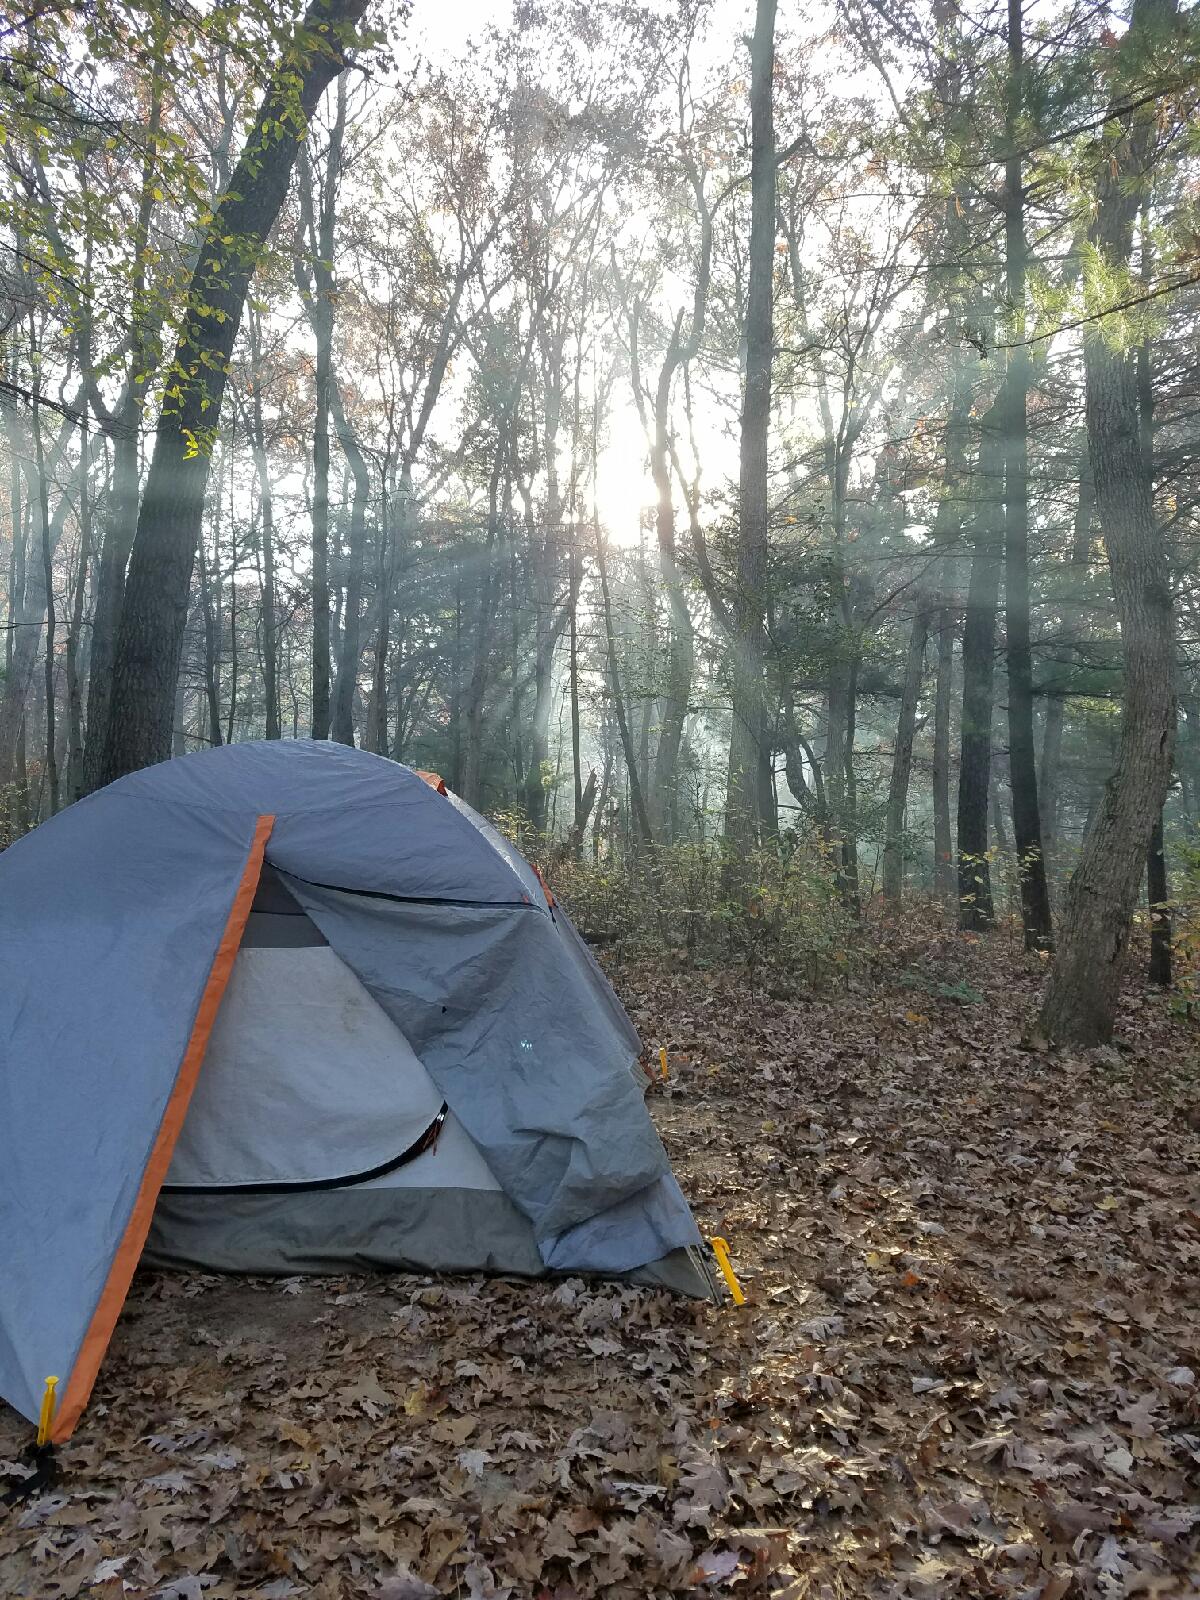 Wisconsin Union on Twitter: "Celebrate the start fall by sleeping under the stars! Rent your camping gear from Outdoor UW in Memorial Union. https://t.co/JF6ZsqyvnY🌙🌌 https://t.co/1jSee5RNDq" / Twitter